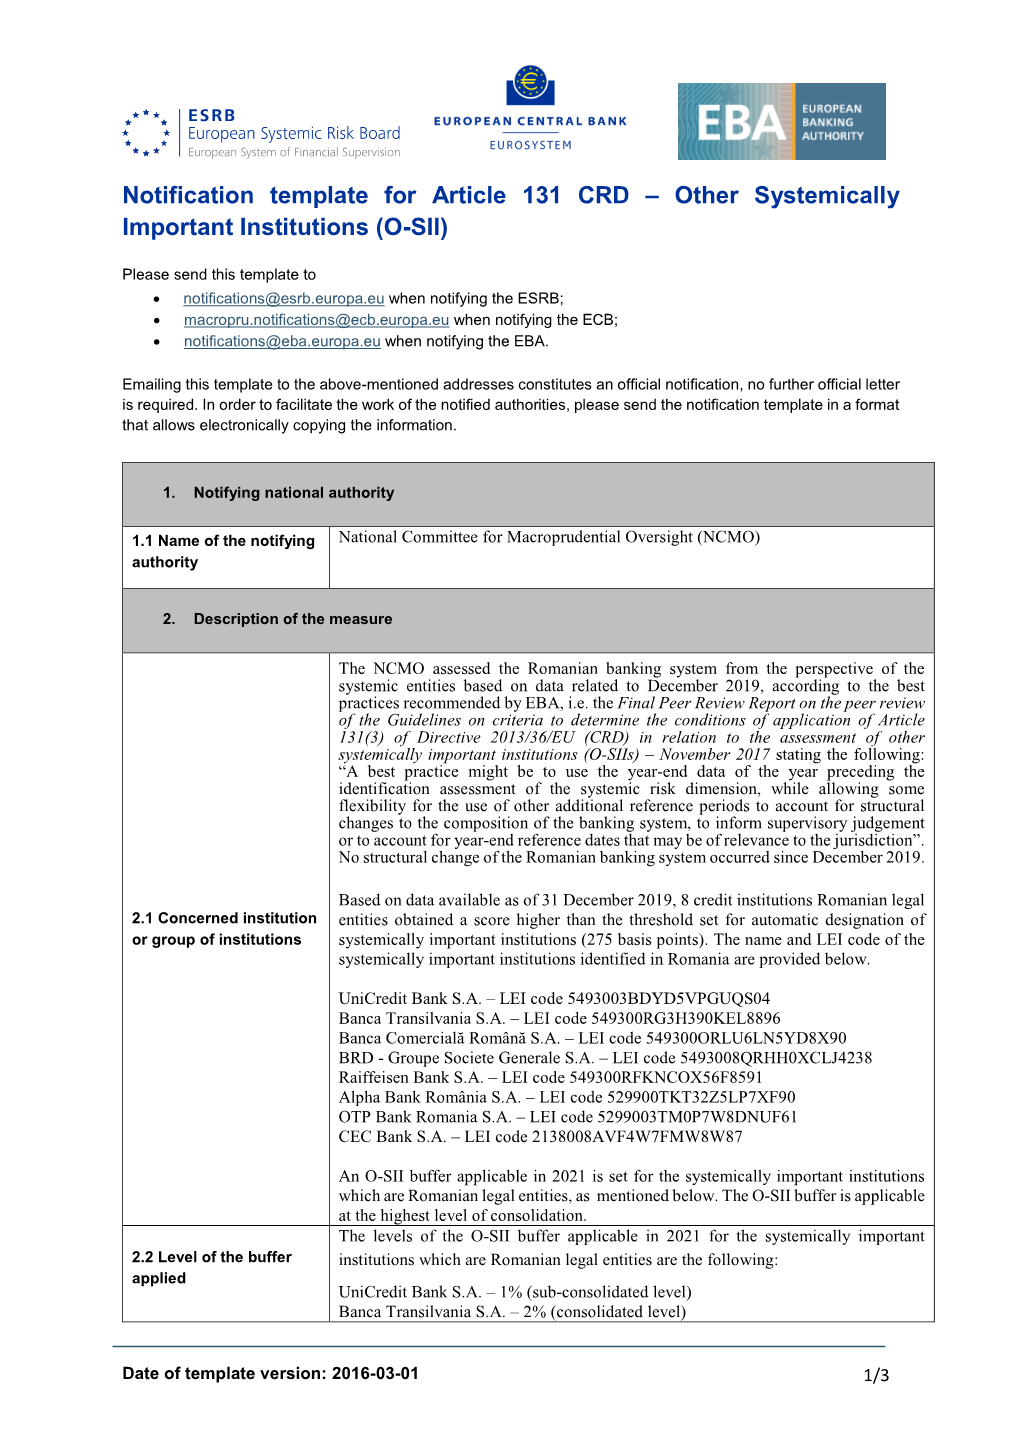 Notification by the National Committee for Macroprudential Oversight